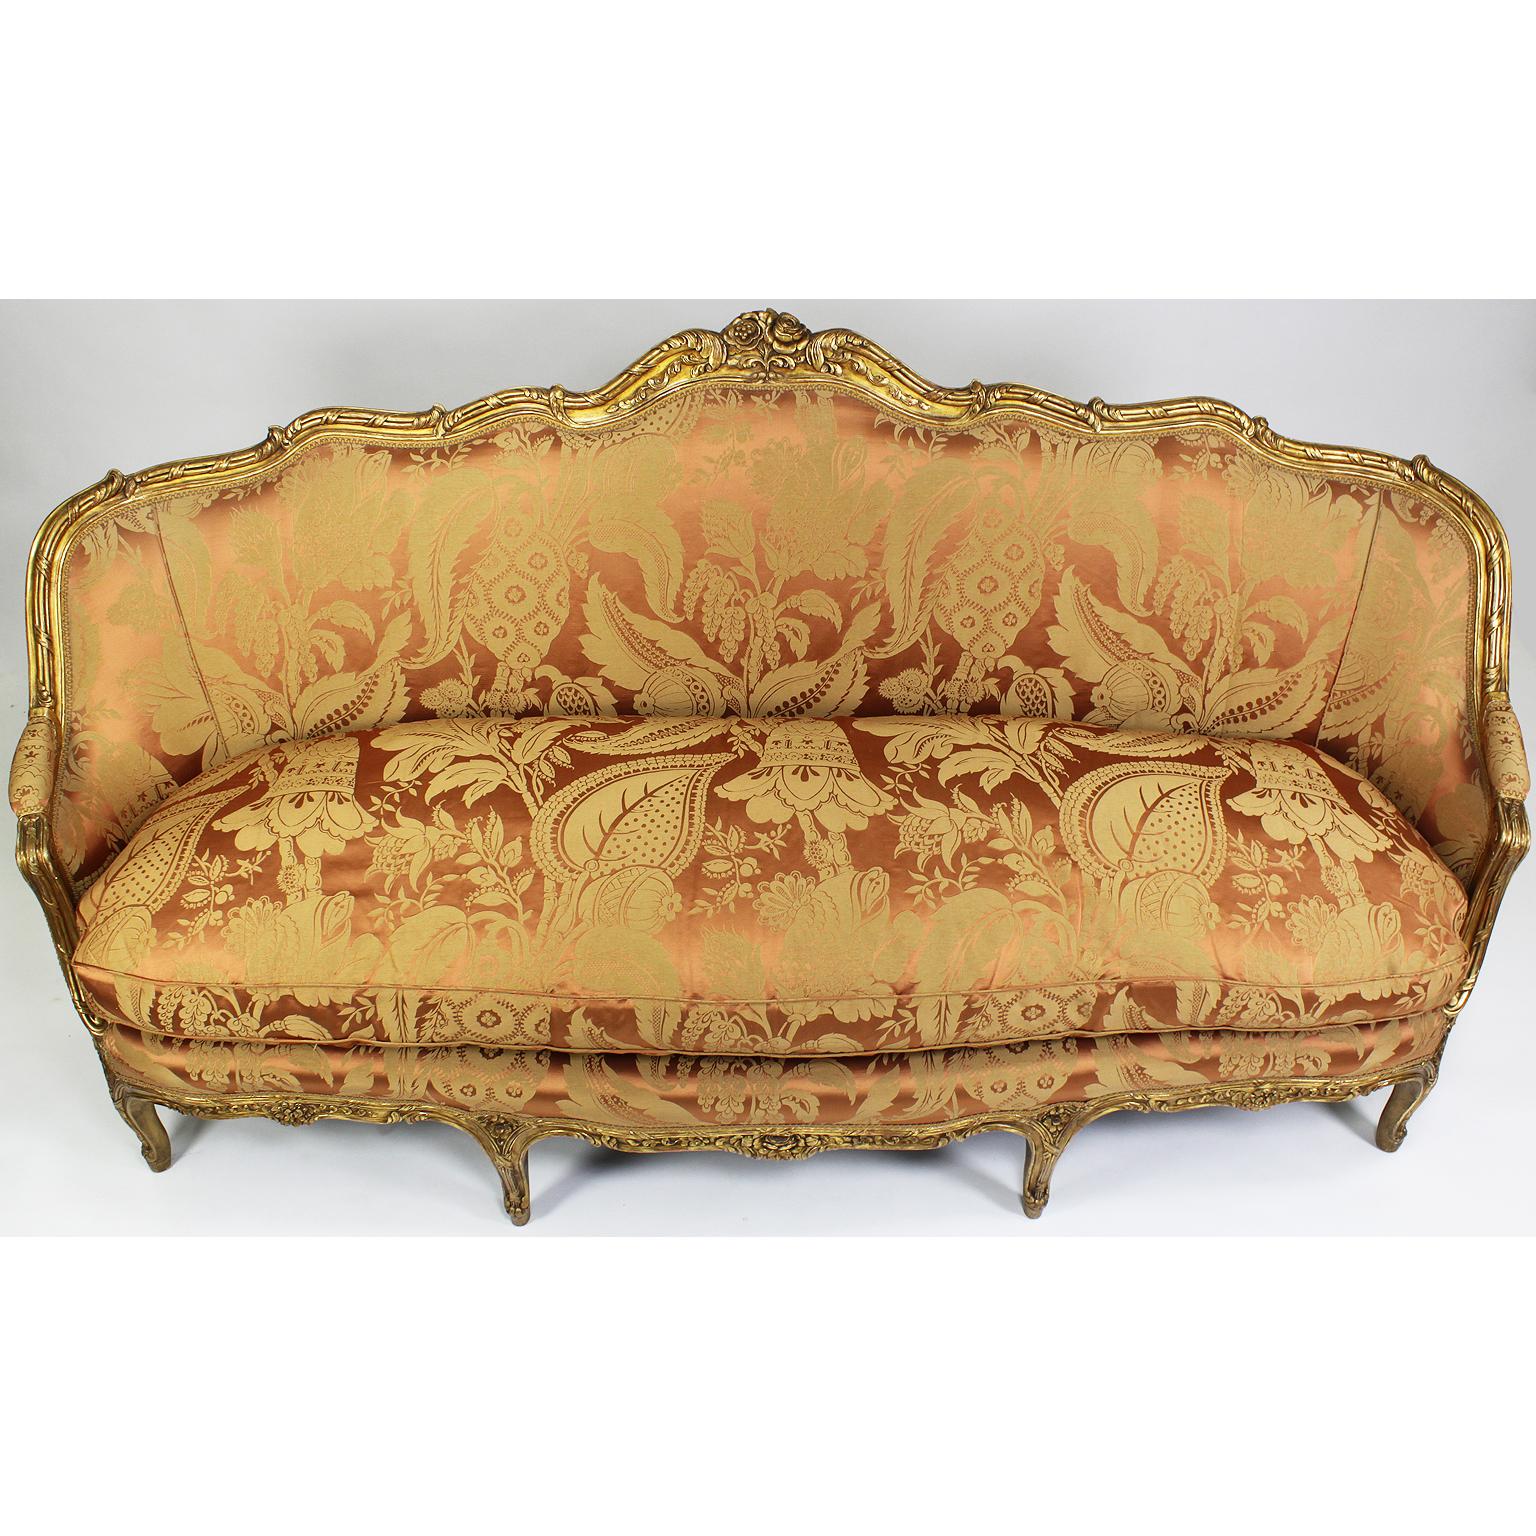 French Fine Louis XV Style Giltwood Carved Bergère Settee, Sofa, Attributed to Jansen